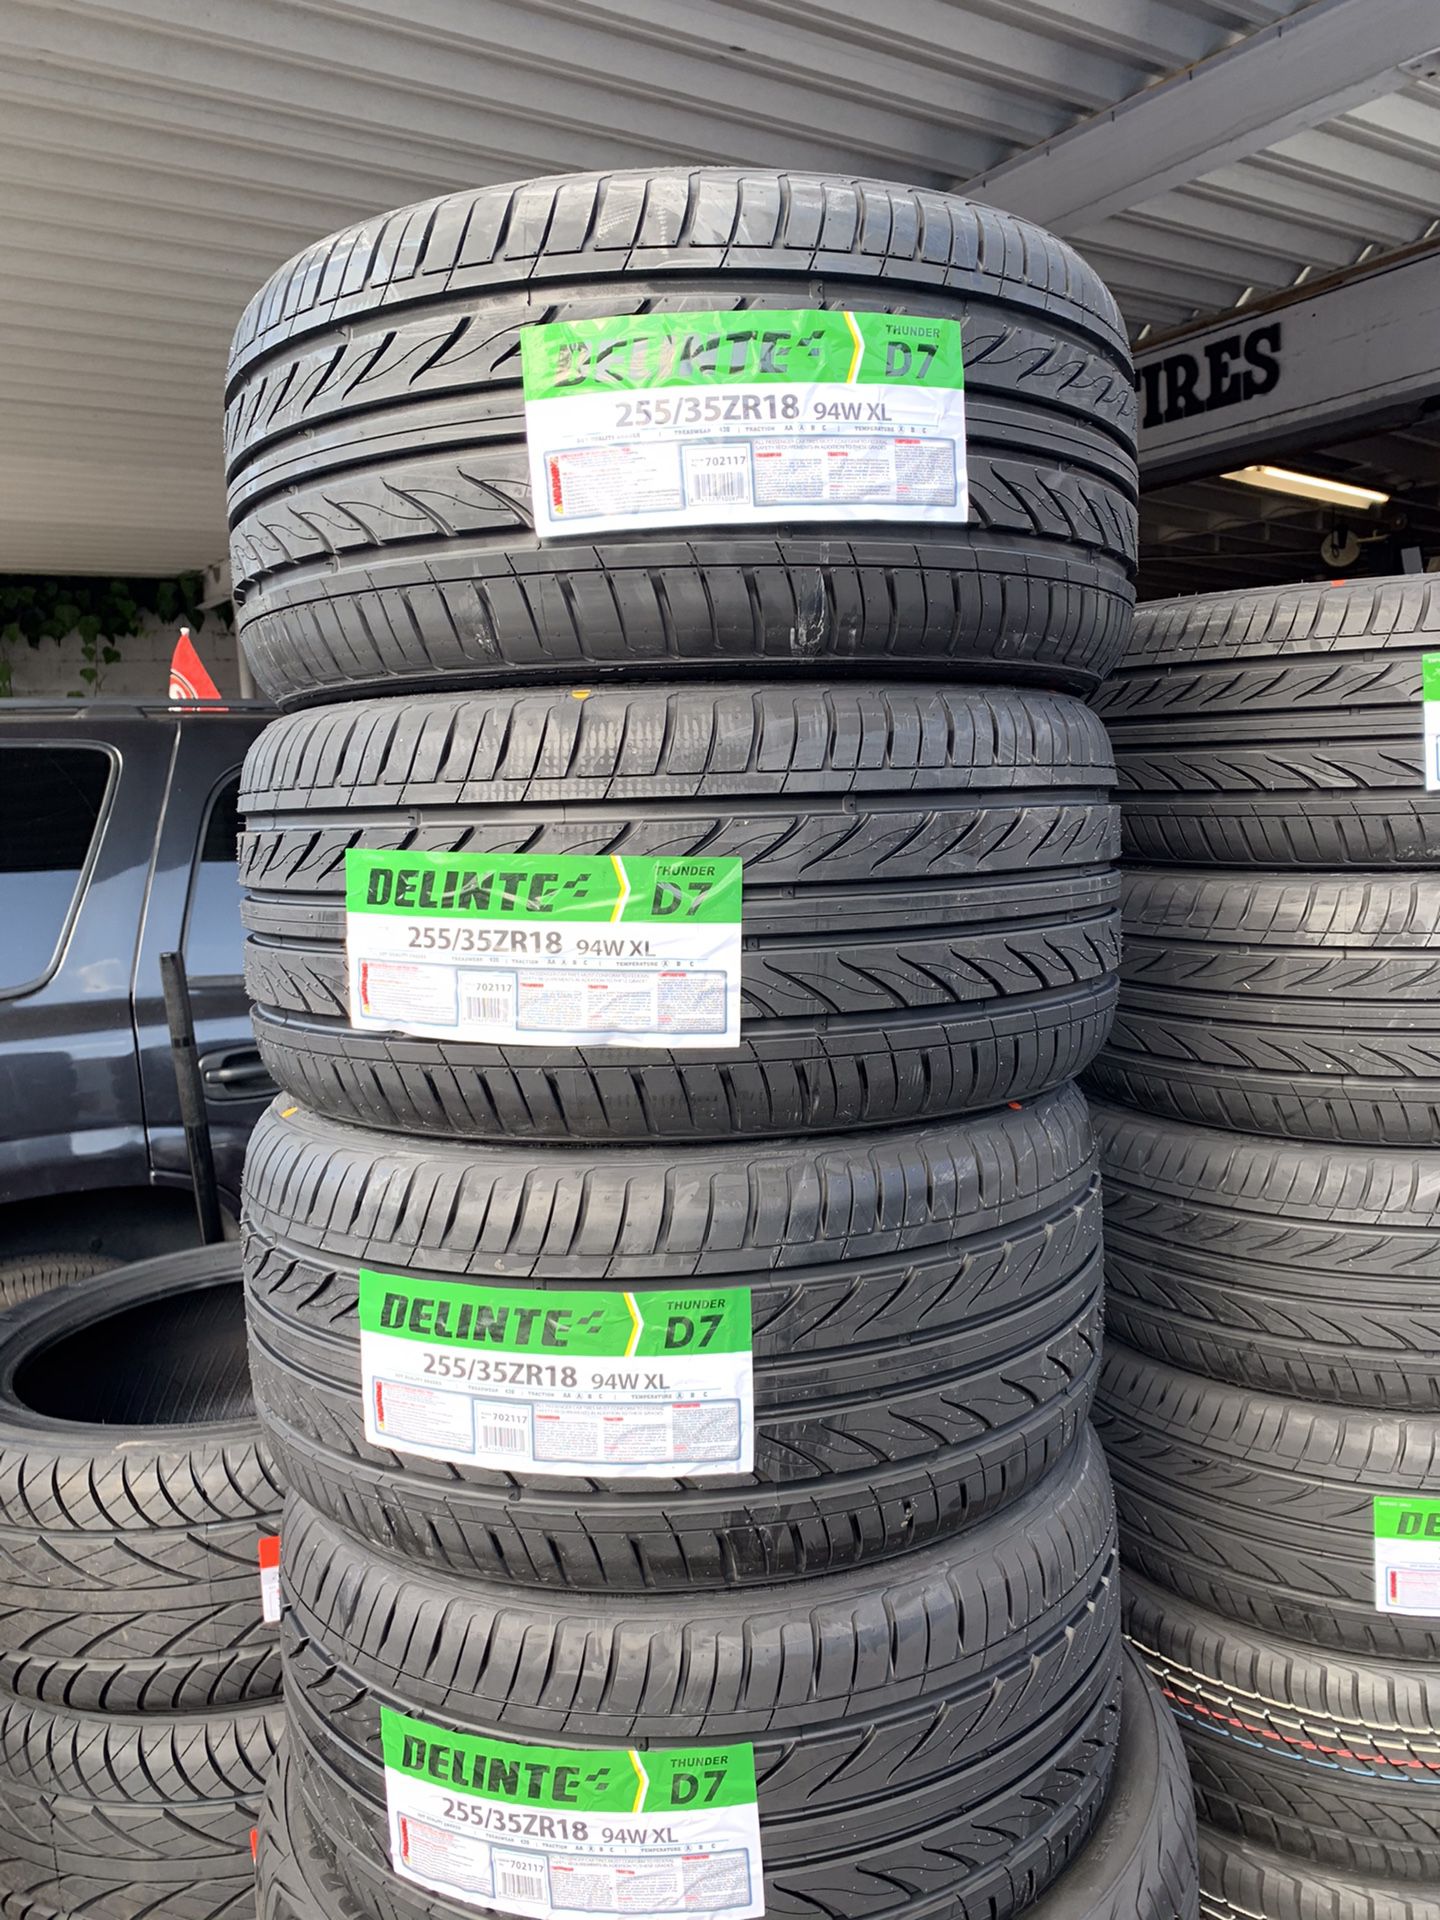 255/35R18 - $179.00 + tax for (2) installed REAR TIRES FOR MERCEDES, BMW, AUDI, LEXUS, AND OTHER SPORT VEHICLES